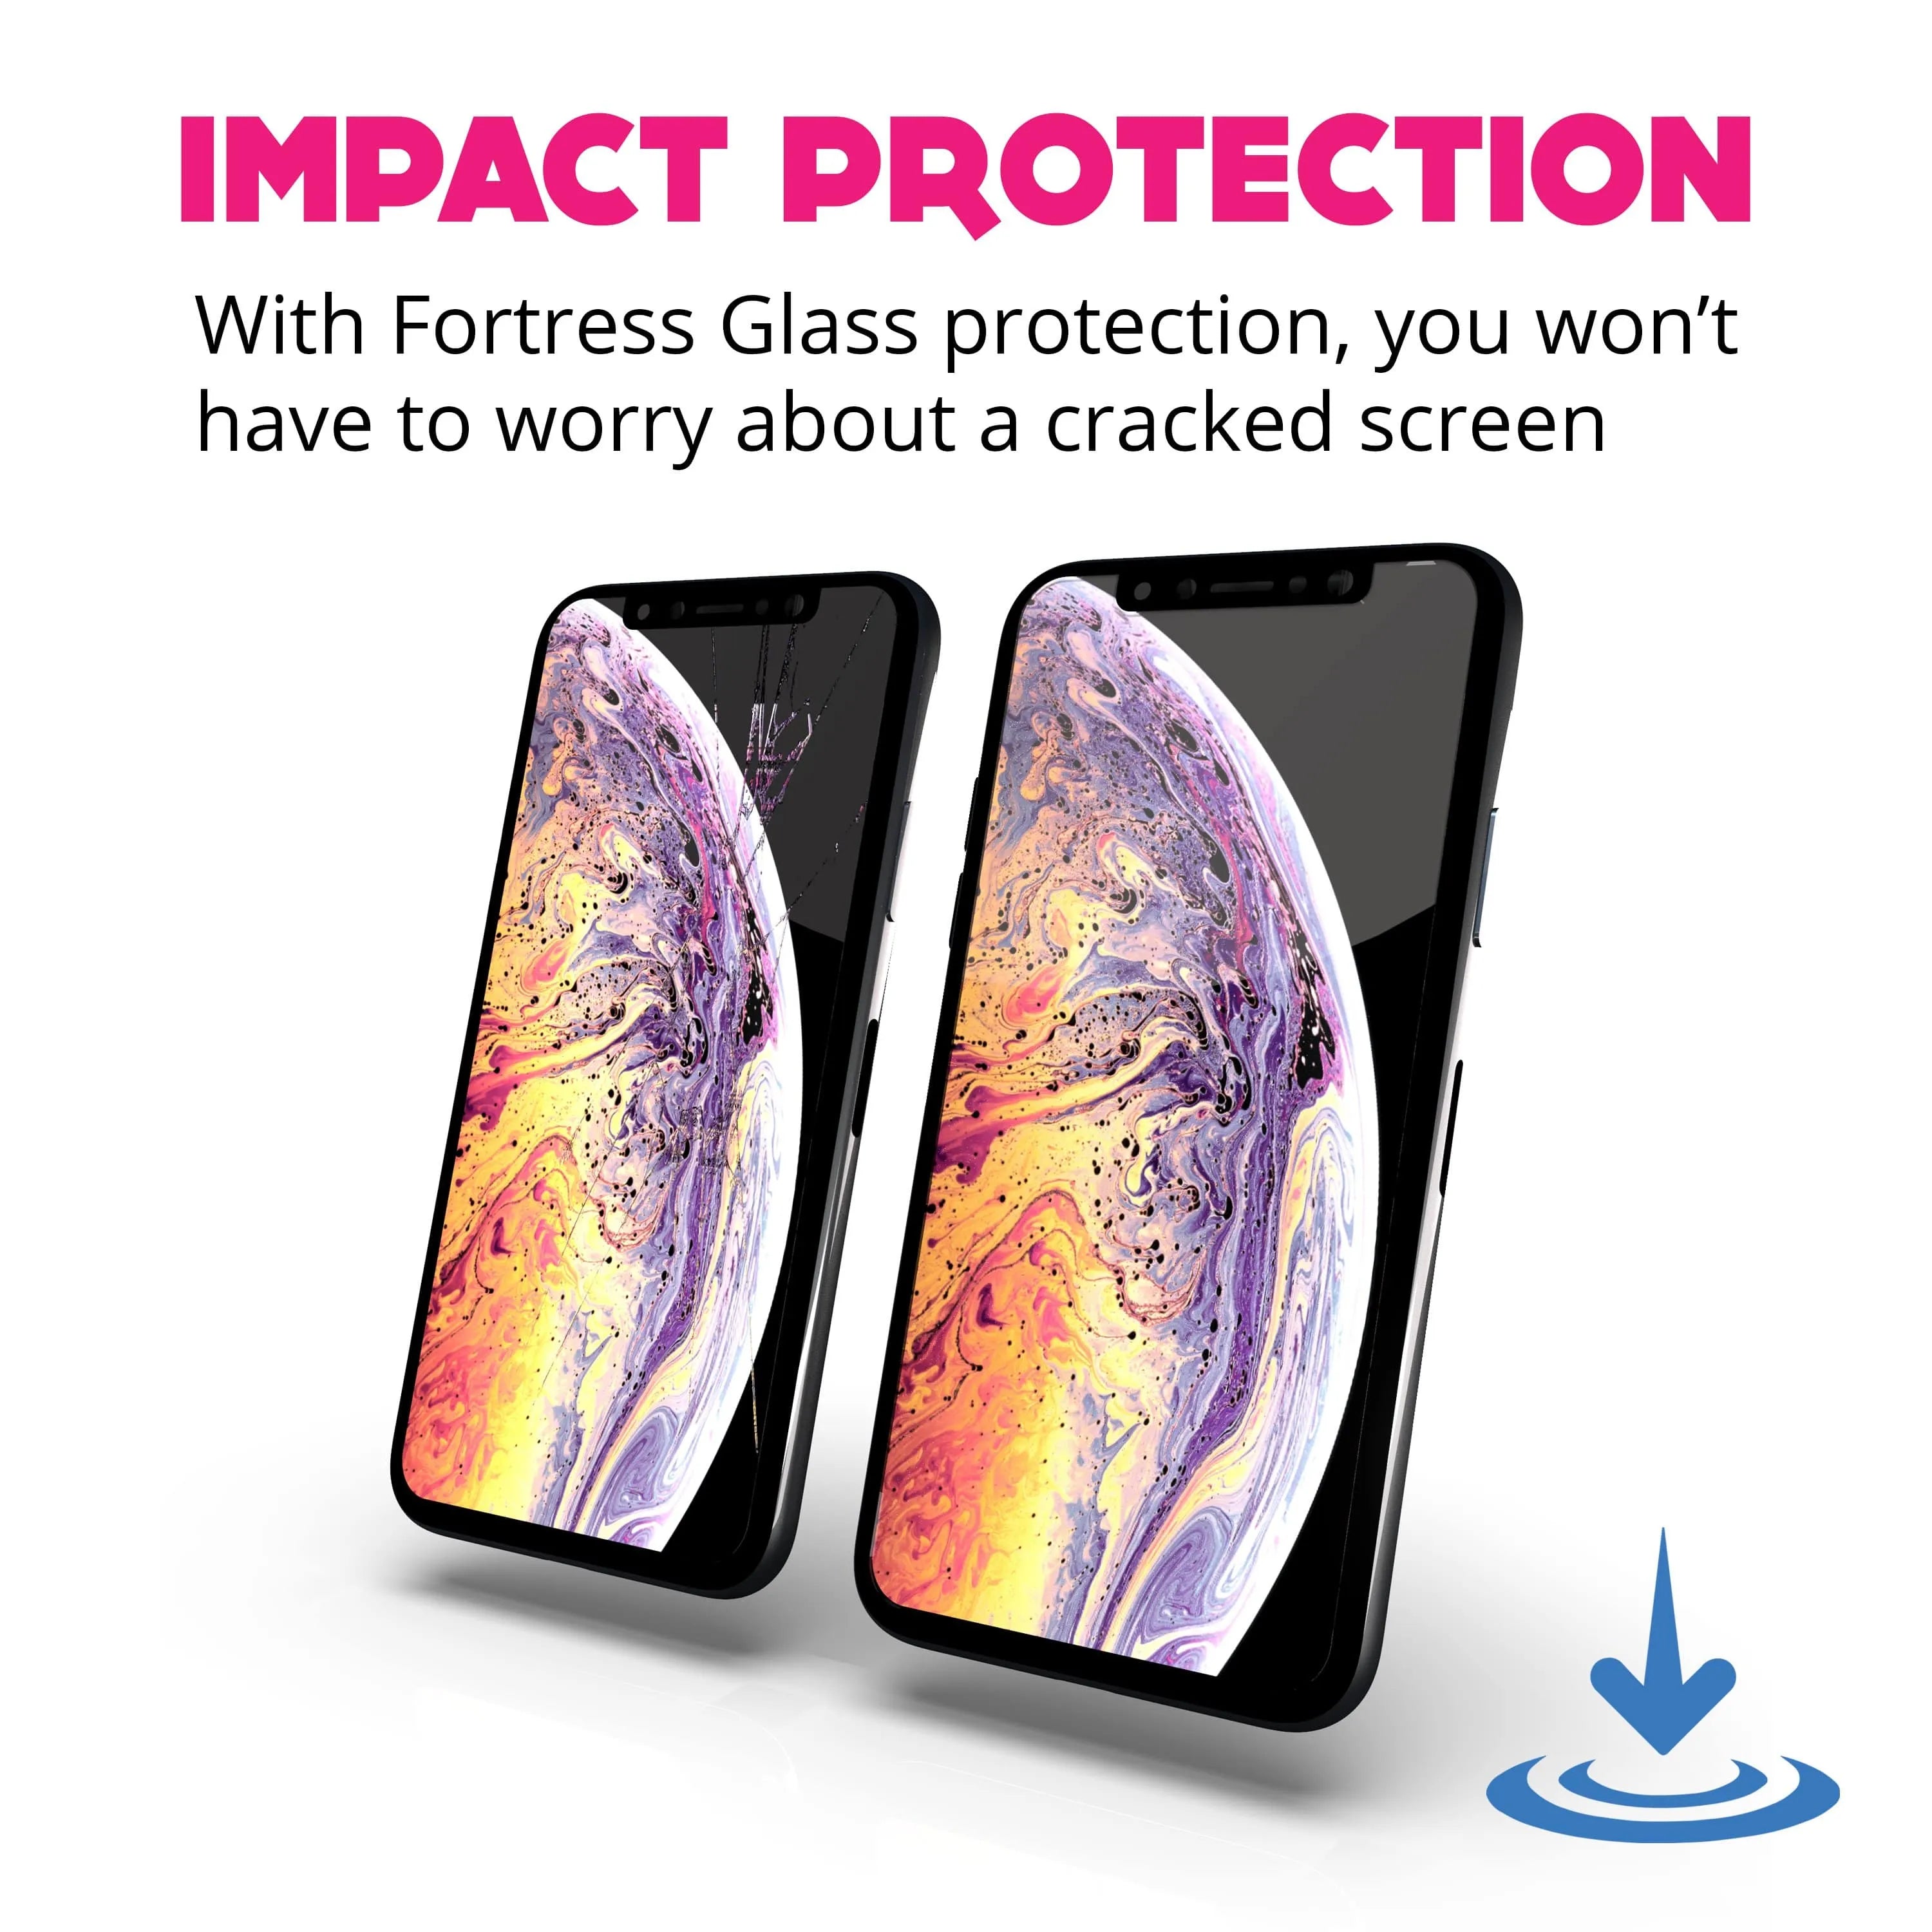 Fortress iPhone 13 Screen Protector - $200 Device Coverage  Scooch Screen Protector